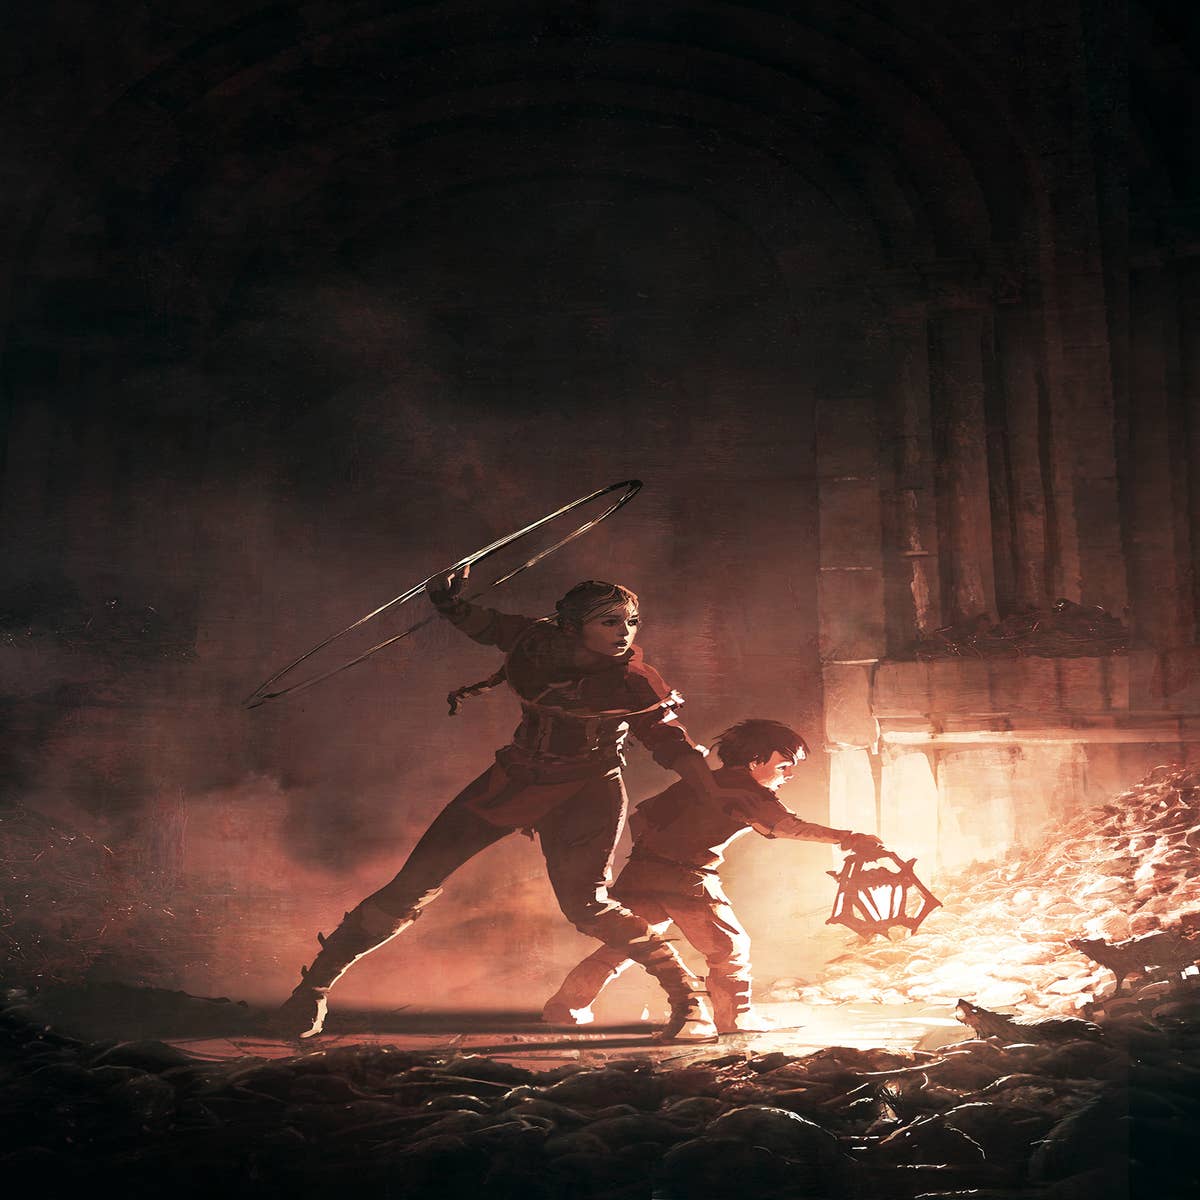 A Plague Tale 3 Is On the Way - The Acclaimed Franchise Continues